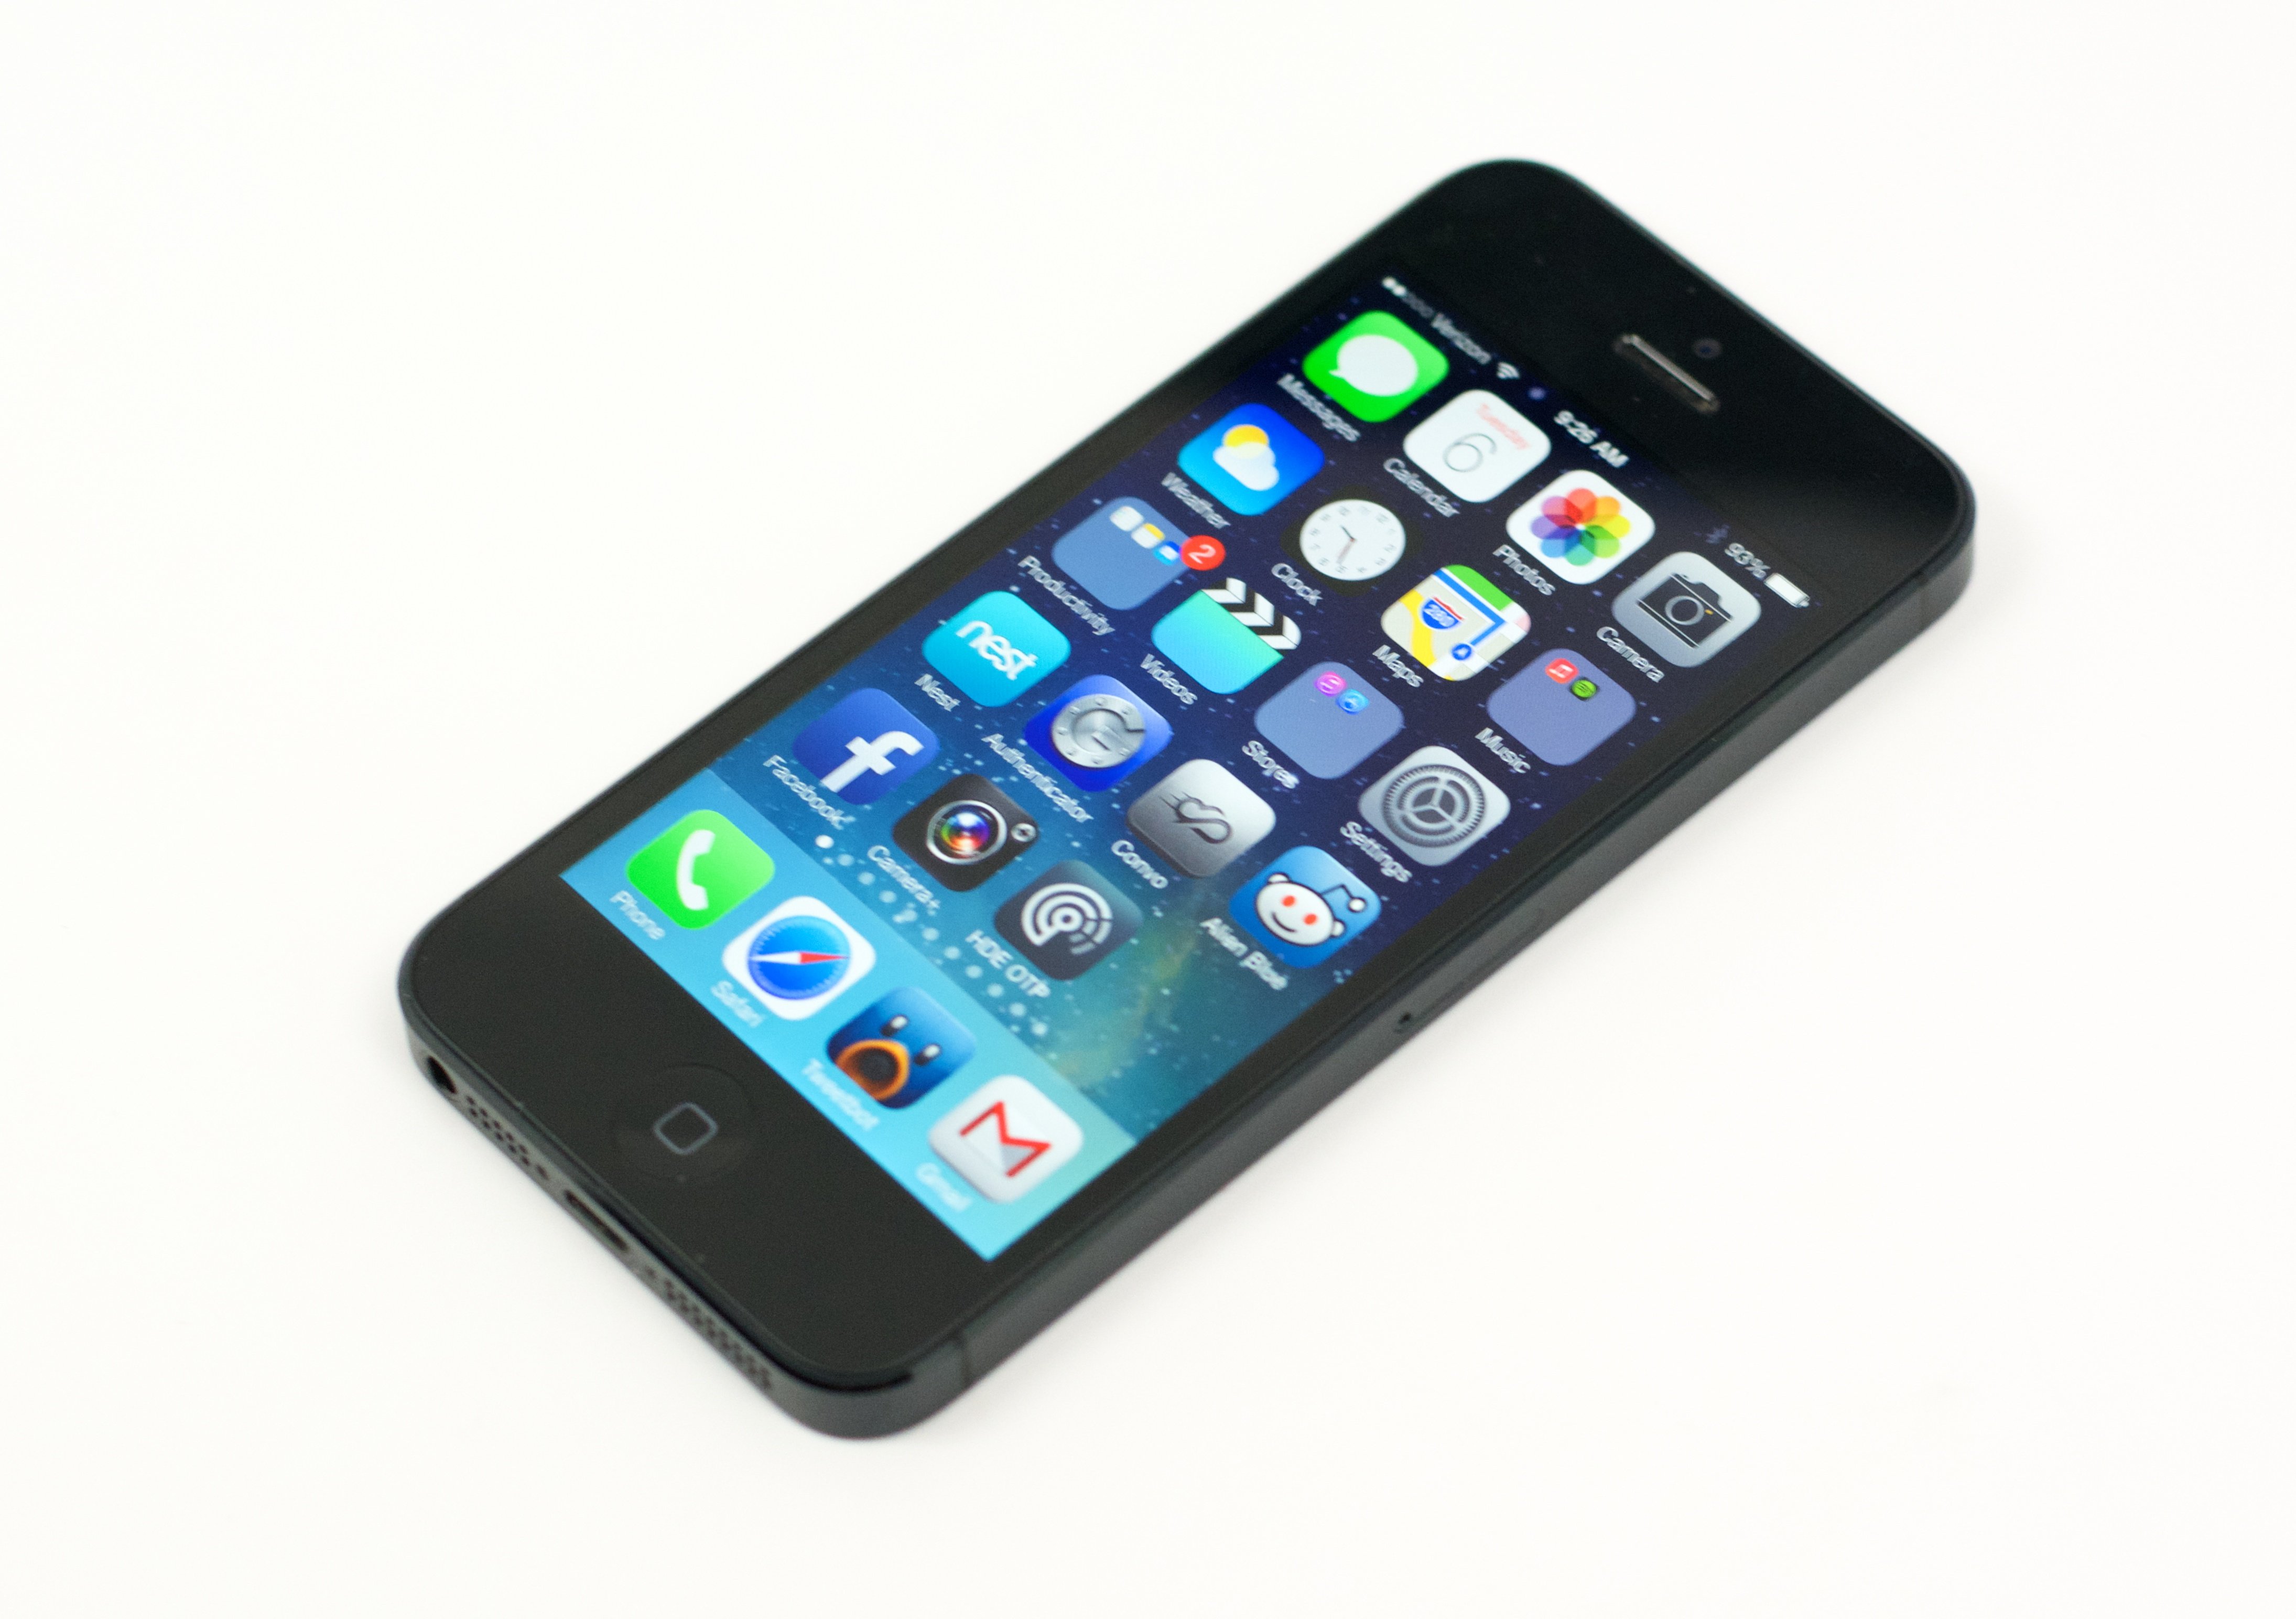 Iphone 5c And Iphone 5s Release Date Confirmed For Sept 20 In U S